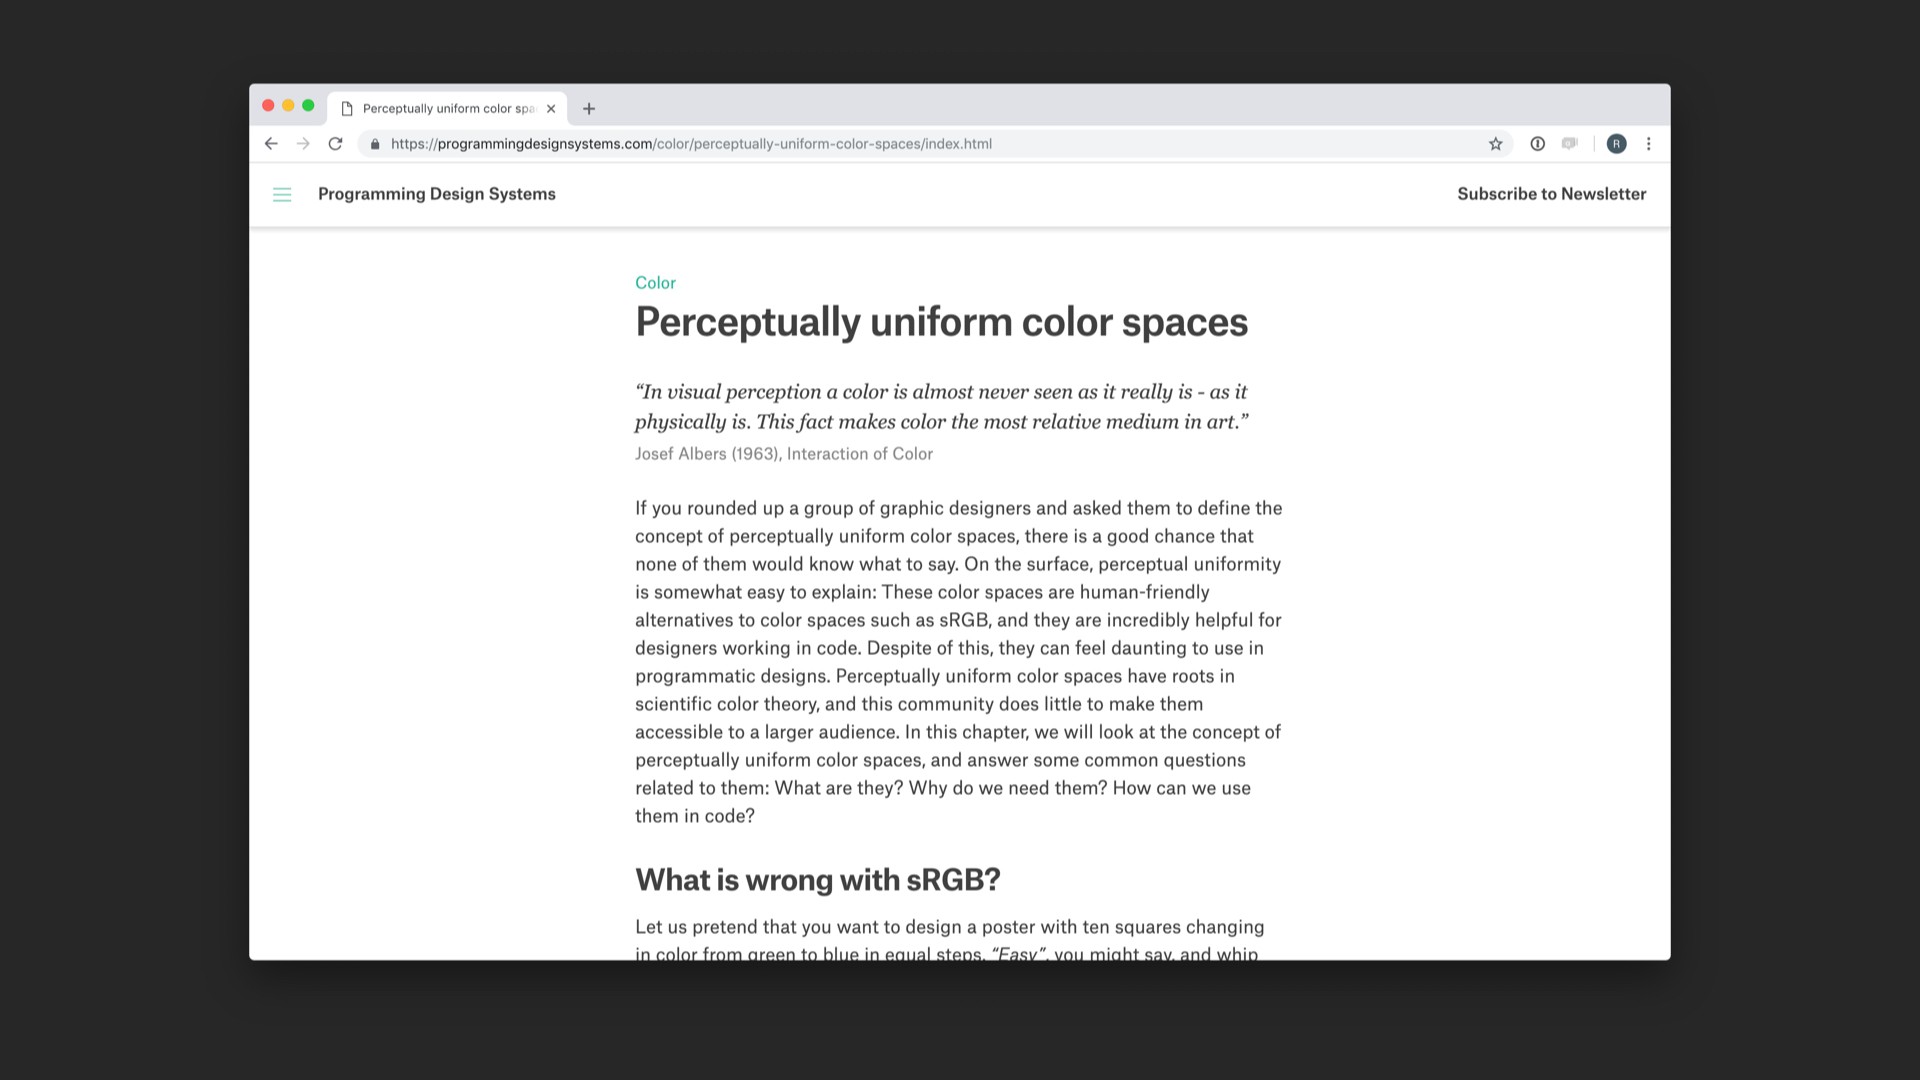 Screenshot of 'Perceptually uniform color spaces' chapter of referenced website.